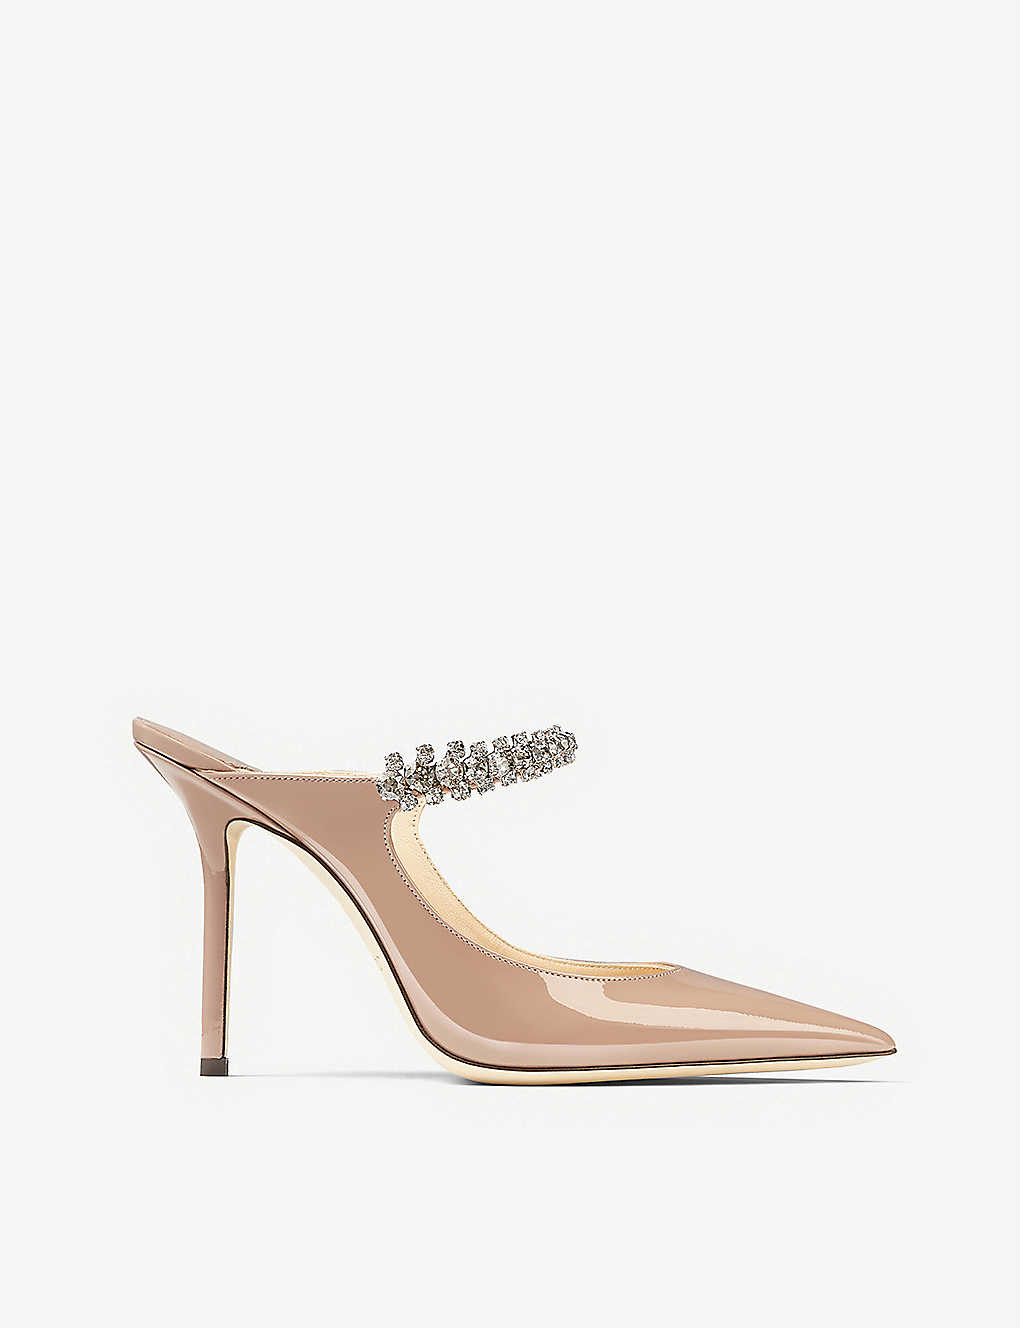 Shop Jimmy Choo Women's Ballet Pink Bing 100 Crystal-embellished Patent-leather Heeled Mules